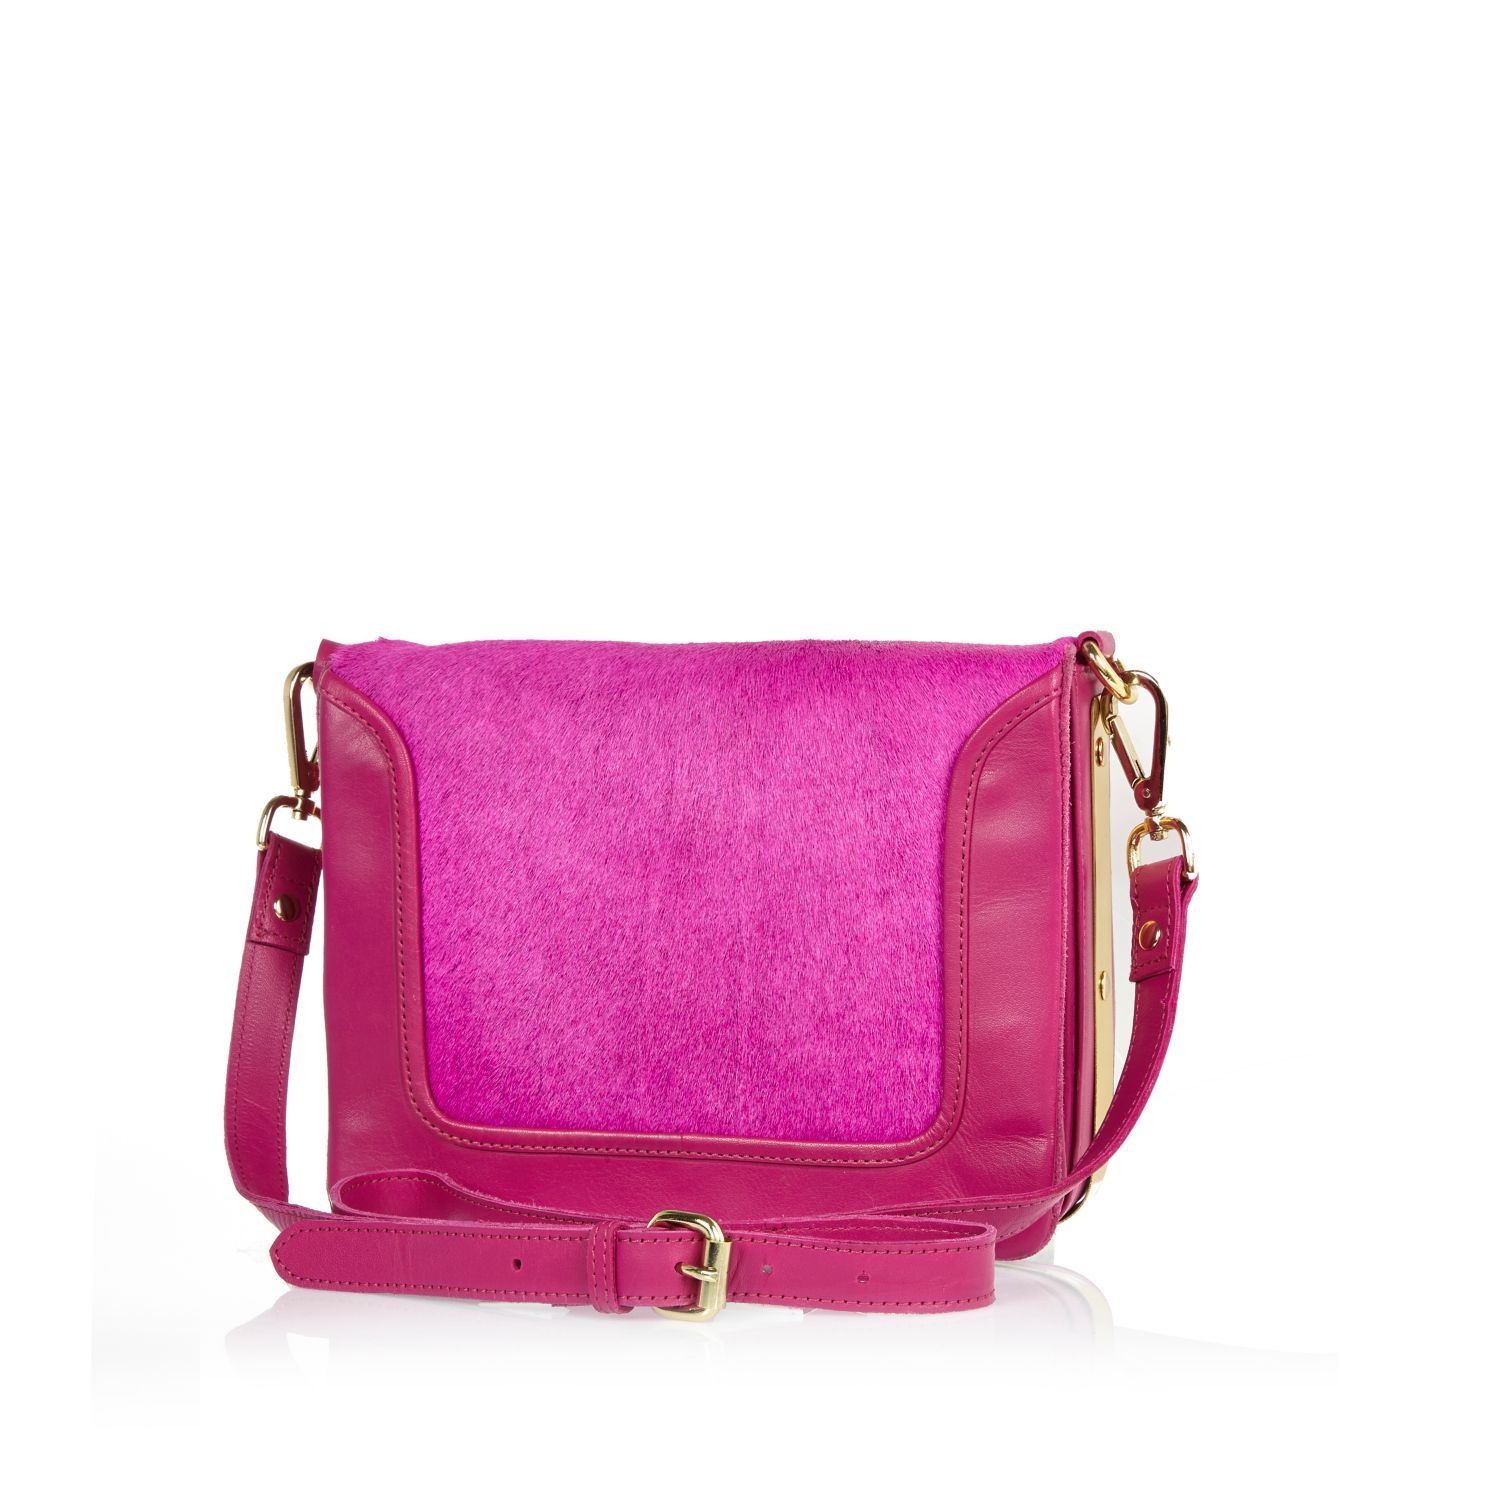 River Island Bright Pink Leather Pony Skin Cross Body Bag in Pink | Lyst